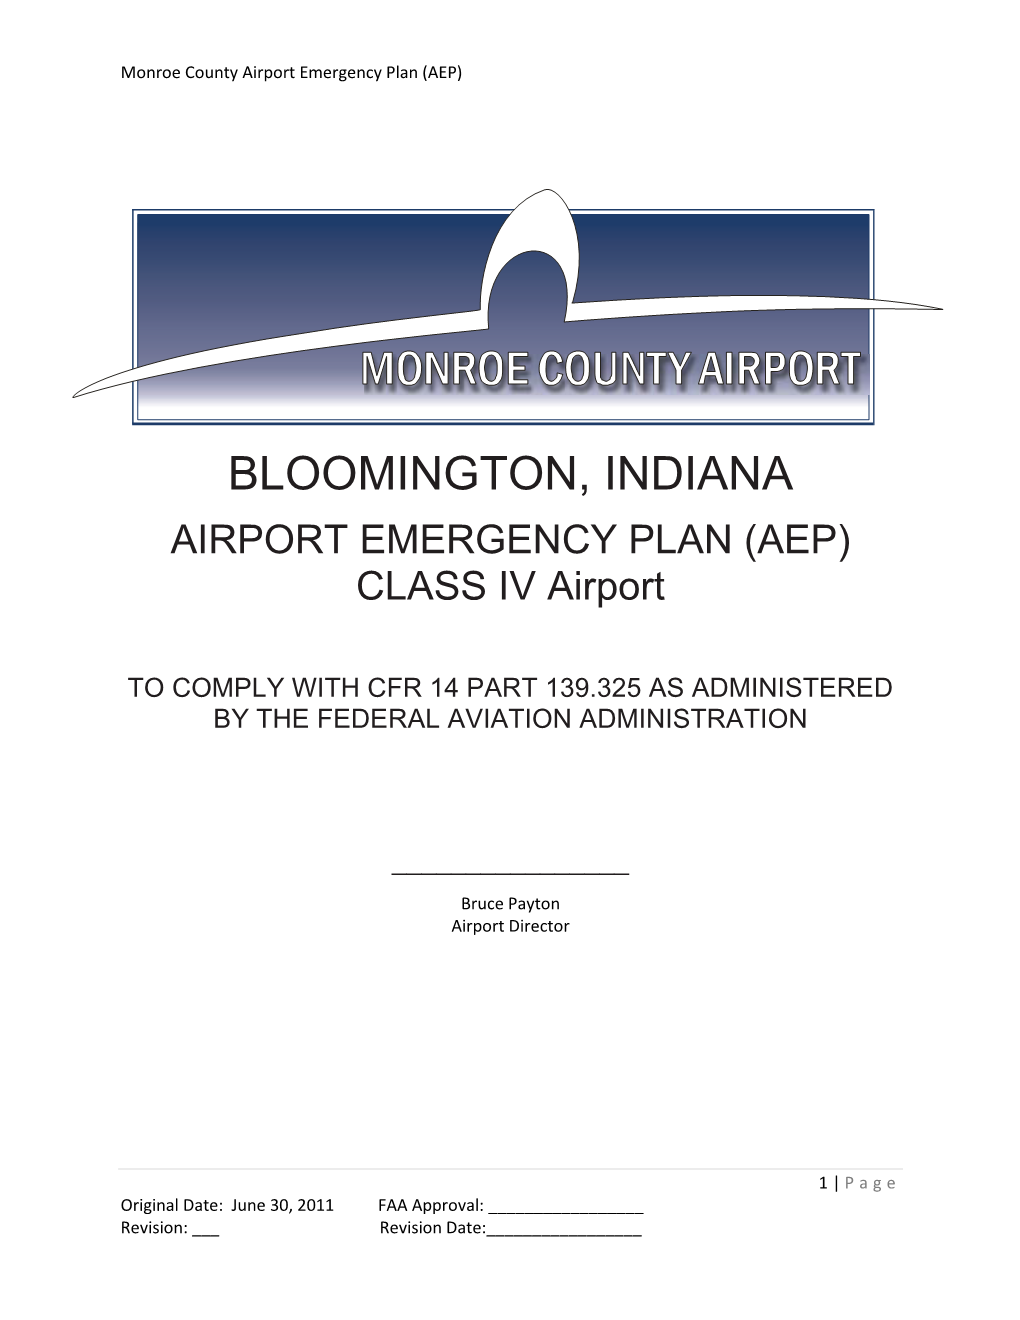 BLOOMINGTON, INDIANA AIRPORT EMERGENCY PLAN (AEP) CLASS IV Airport